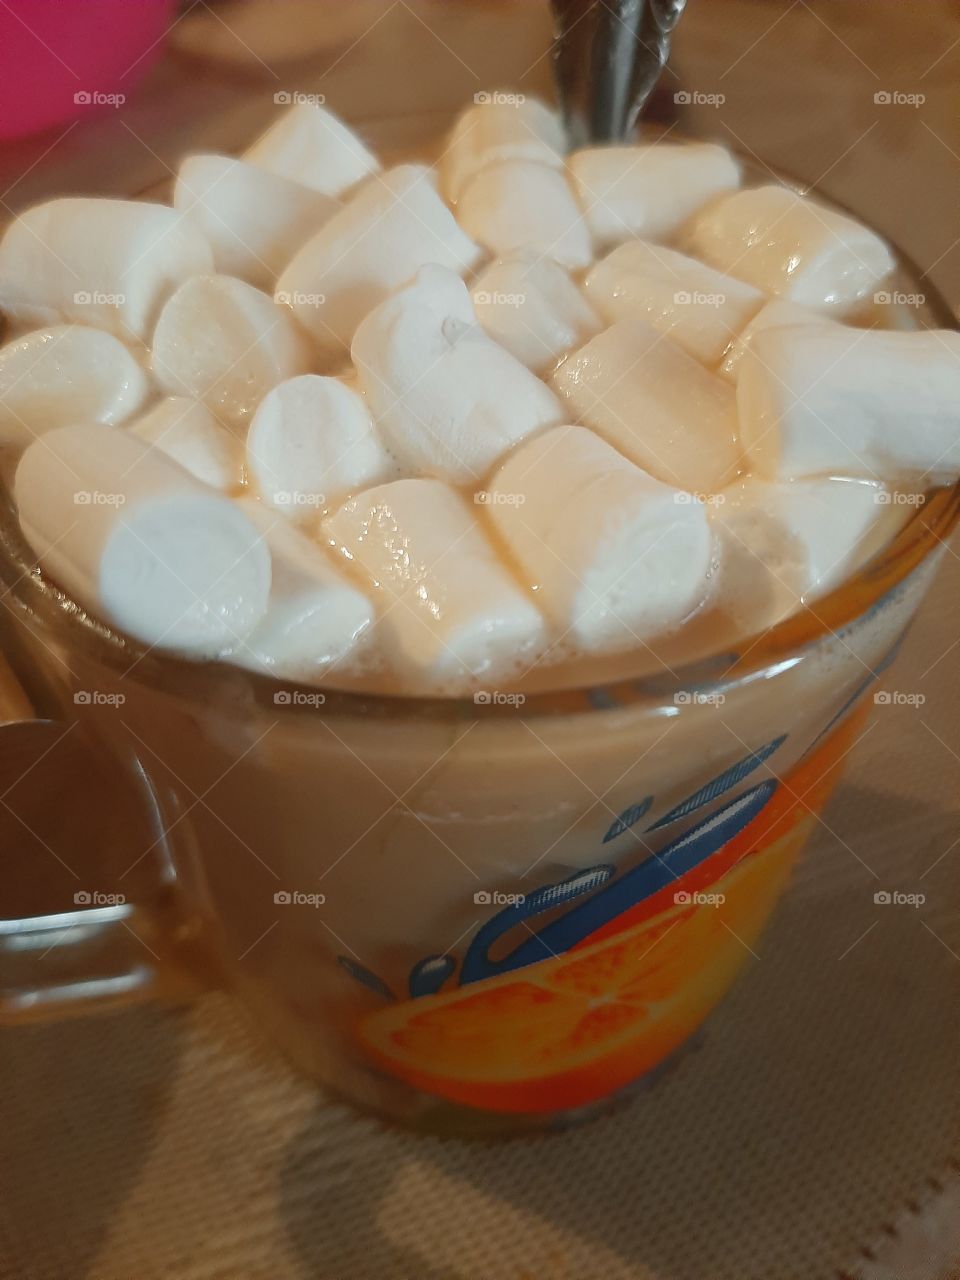 Every morning drink delicious coffee with marshmallow